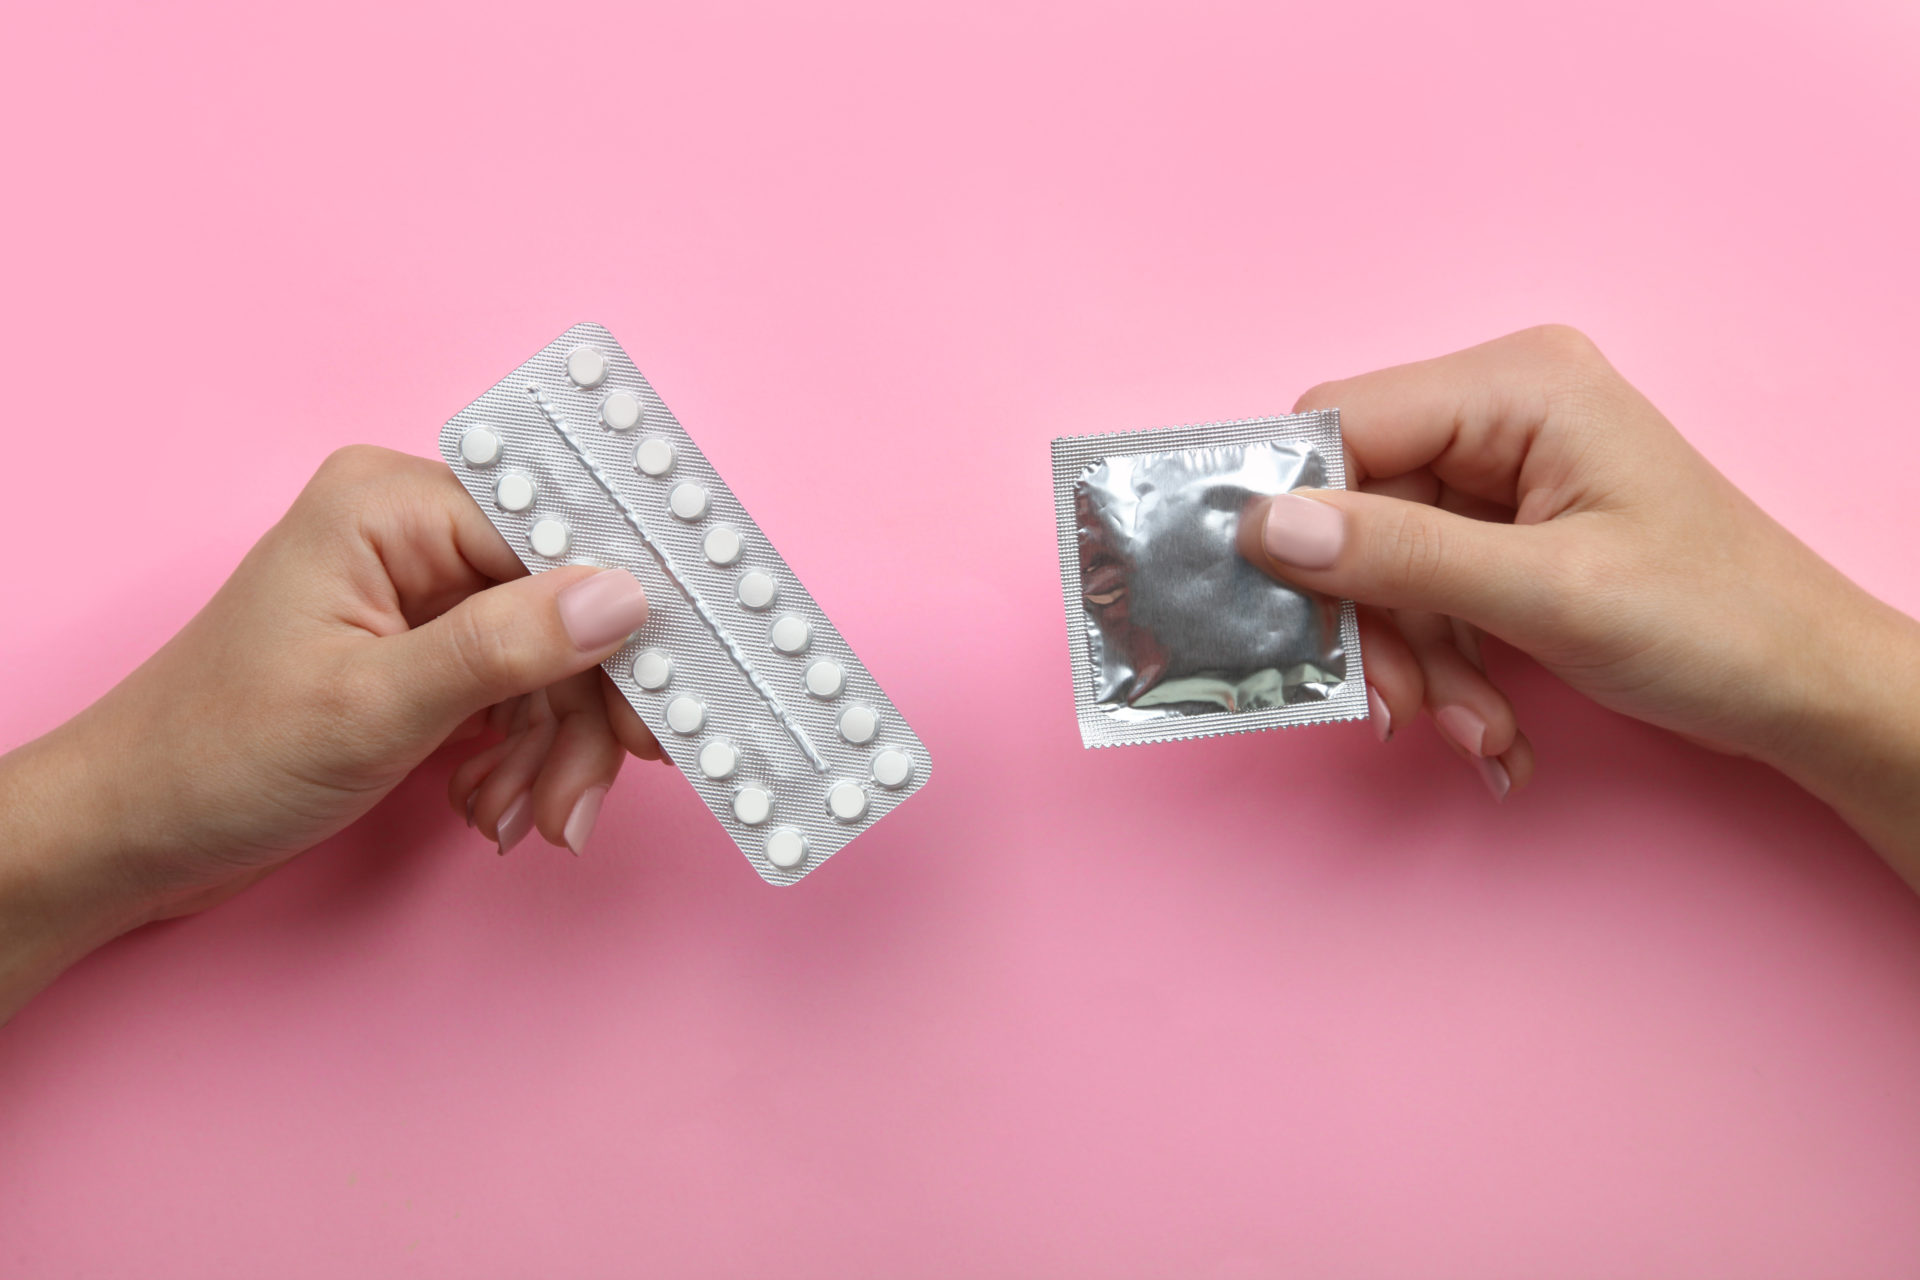 Find out everything you need to know about conceiving after birth control